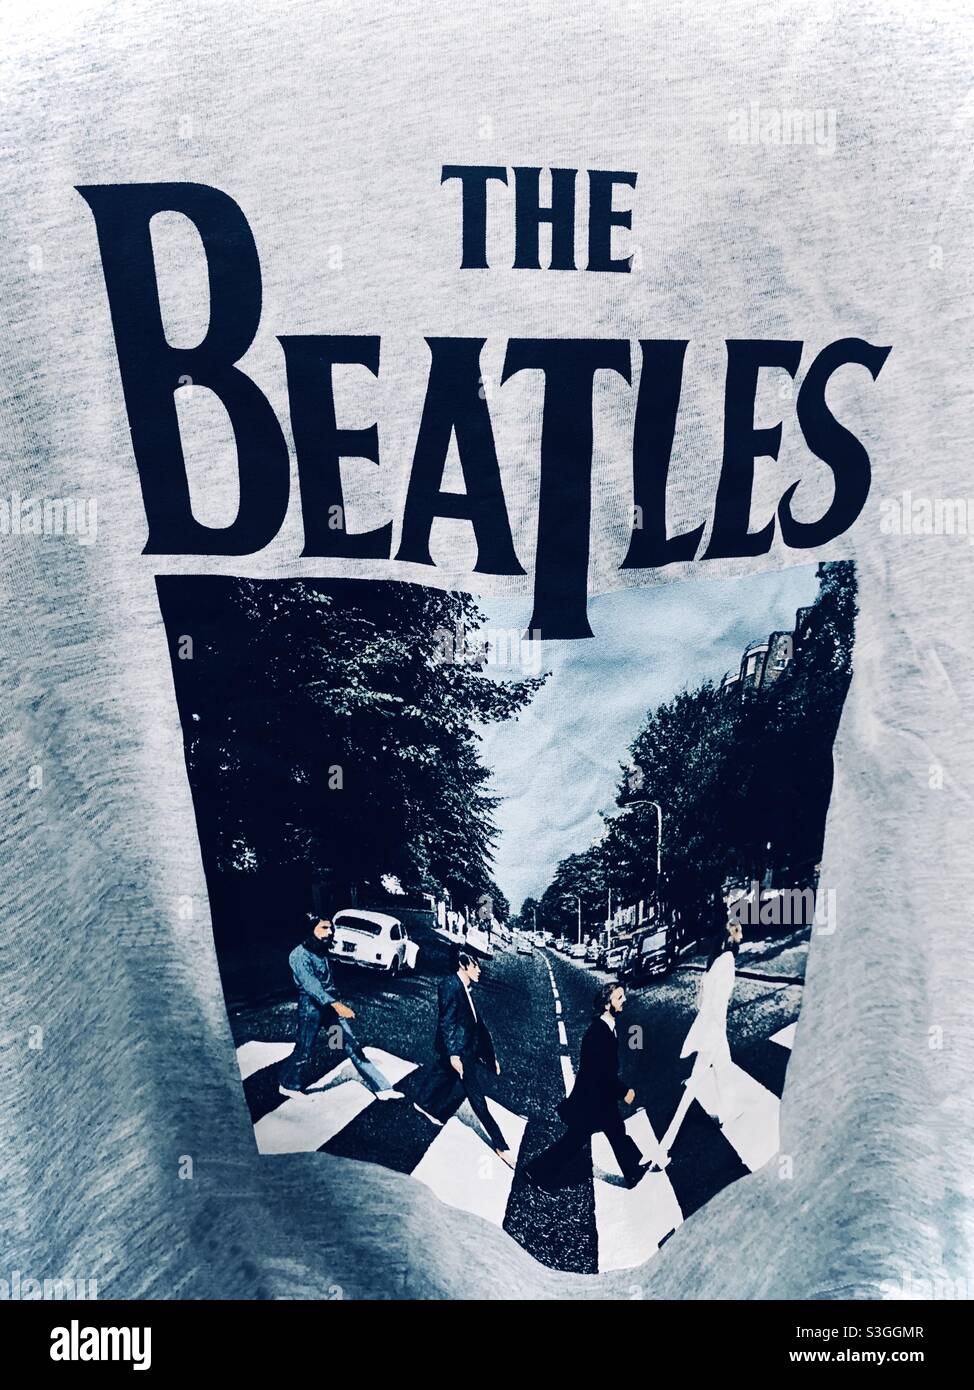 The Beatles tapestry and cloth fabric T-shirt Stock Photo